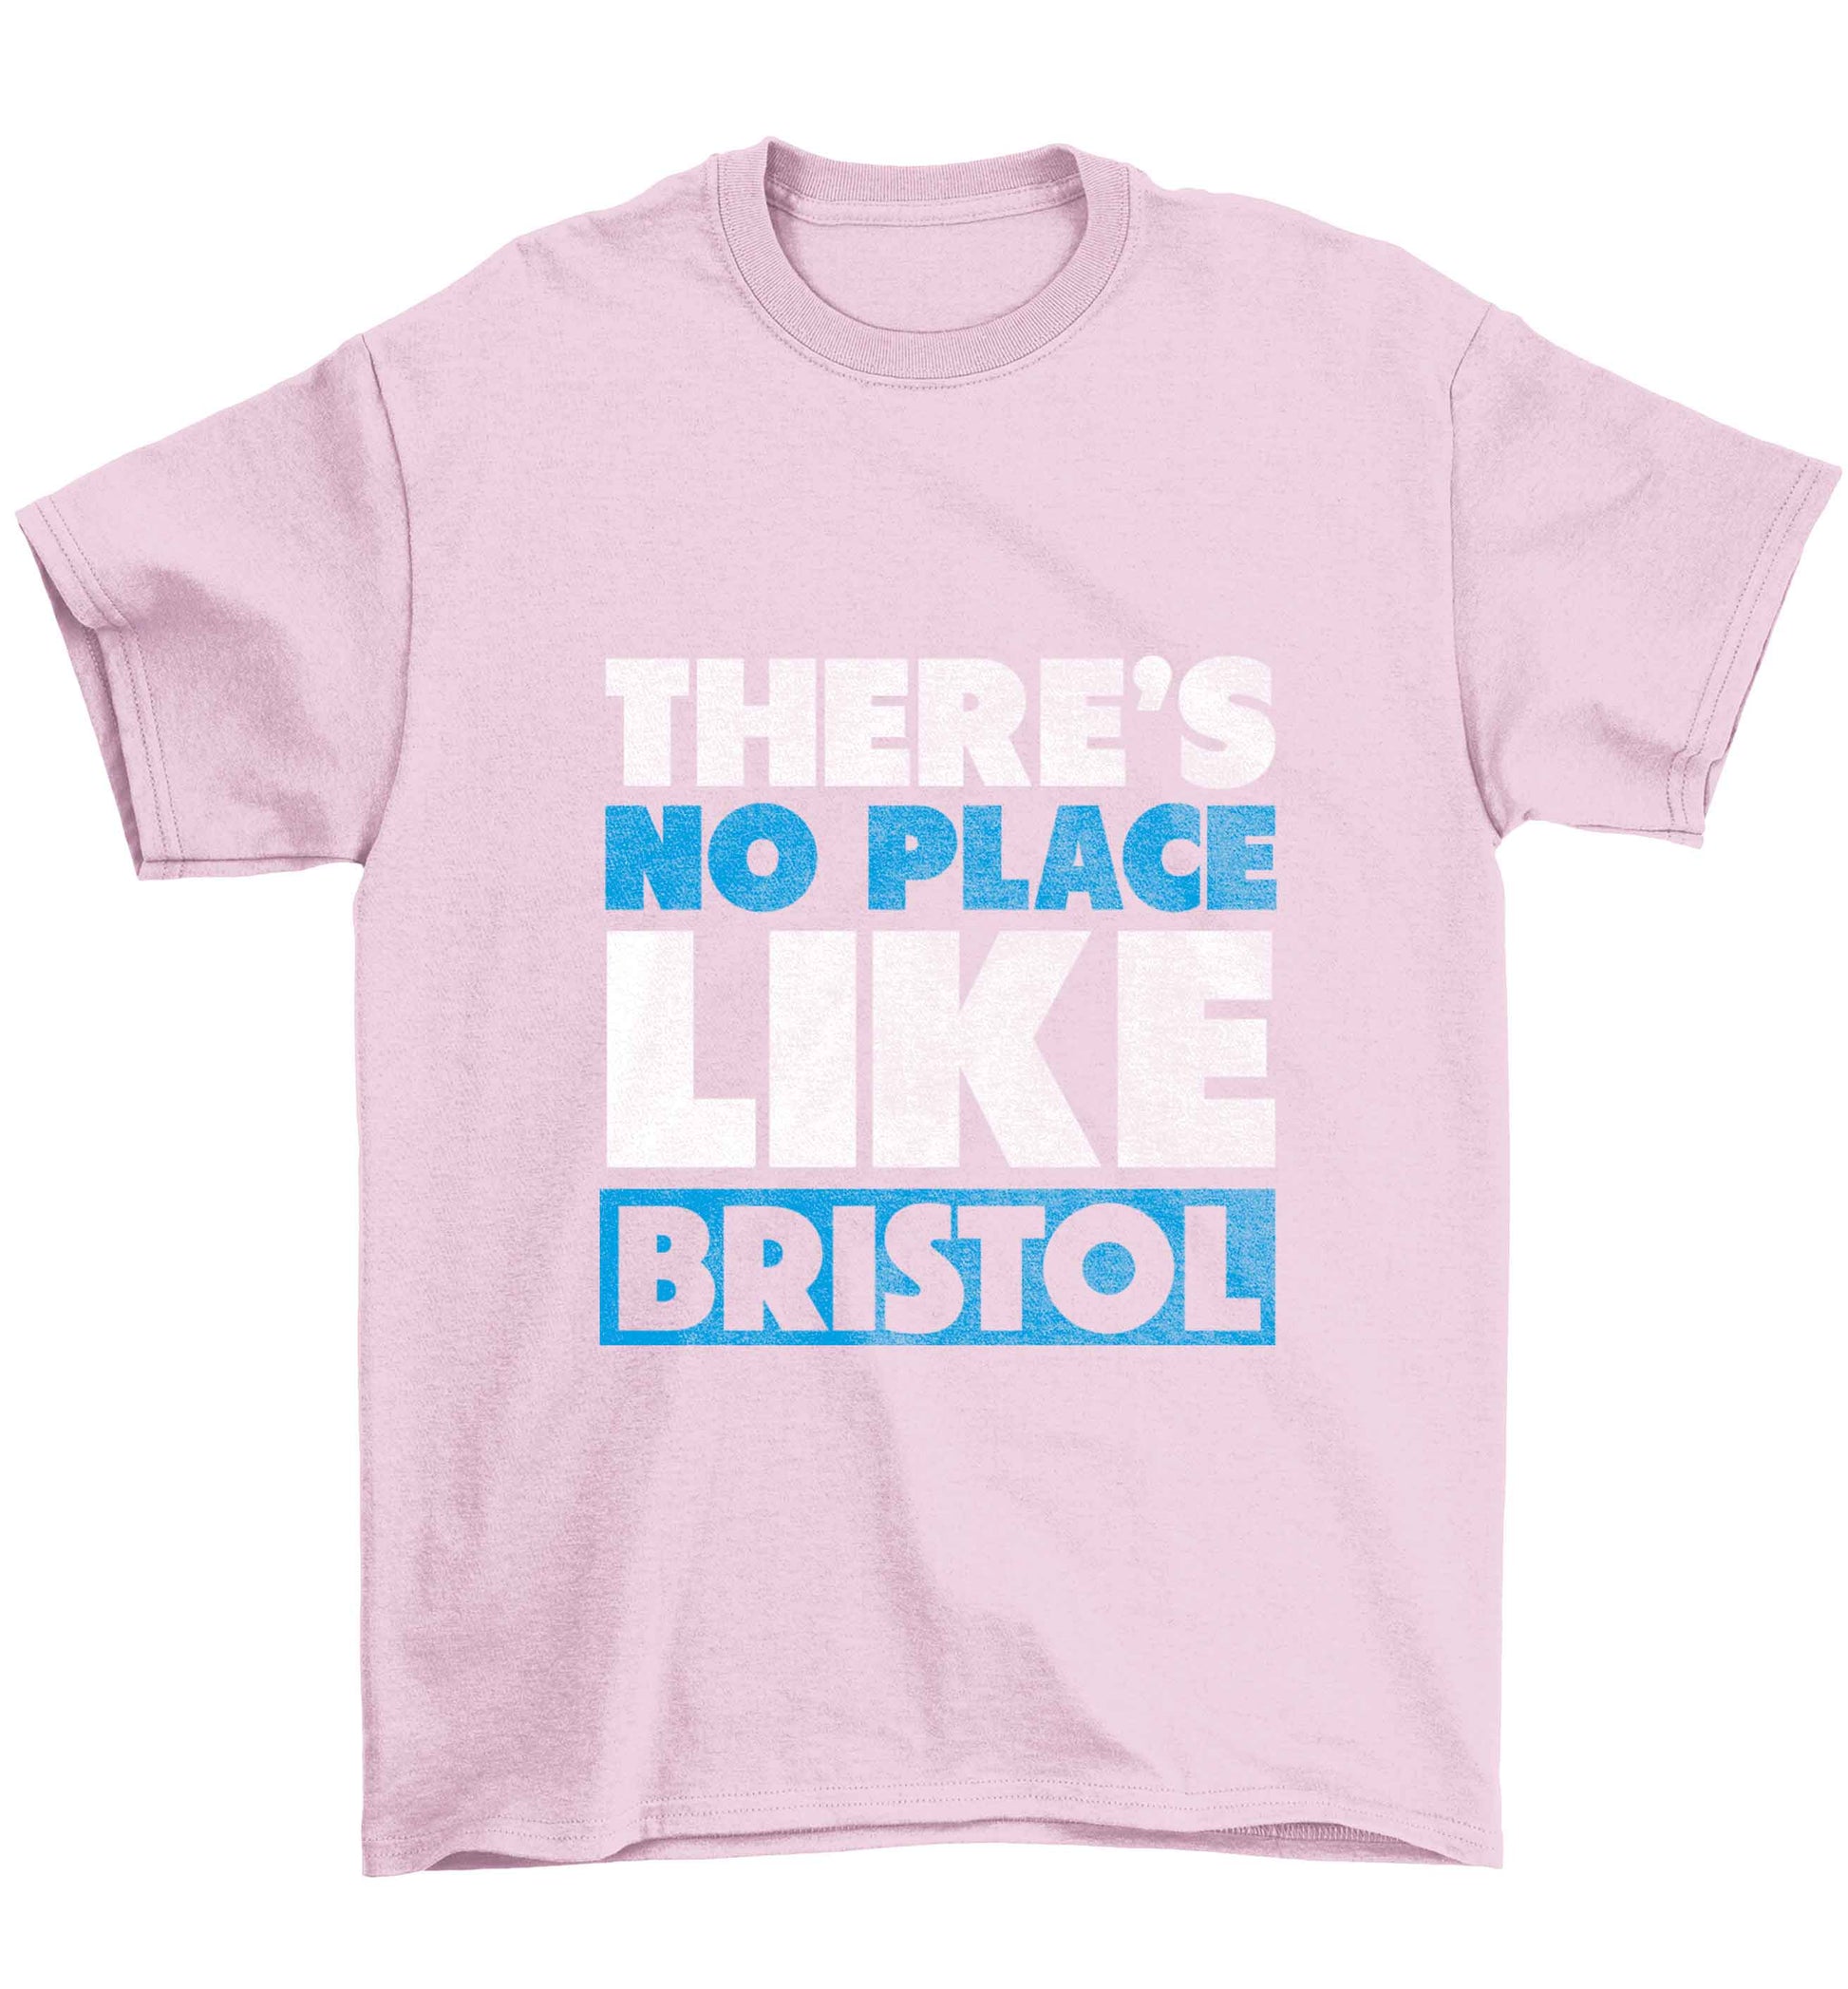 There's no place like Bristol Children's light pink Tshirt 12-13 Years